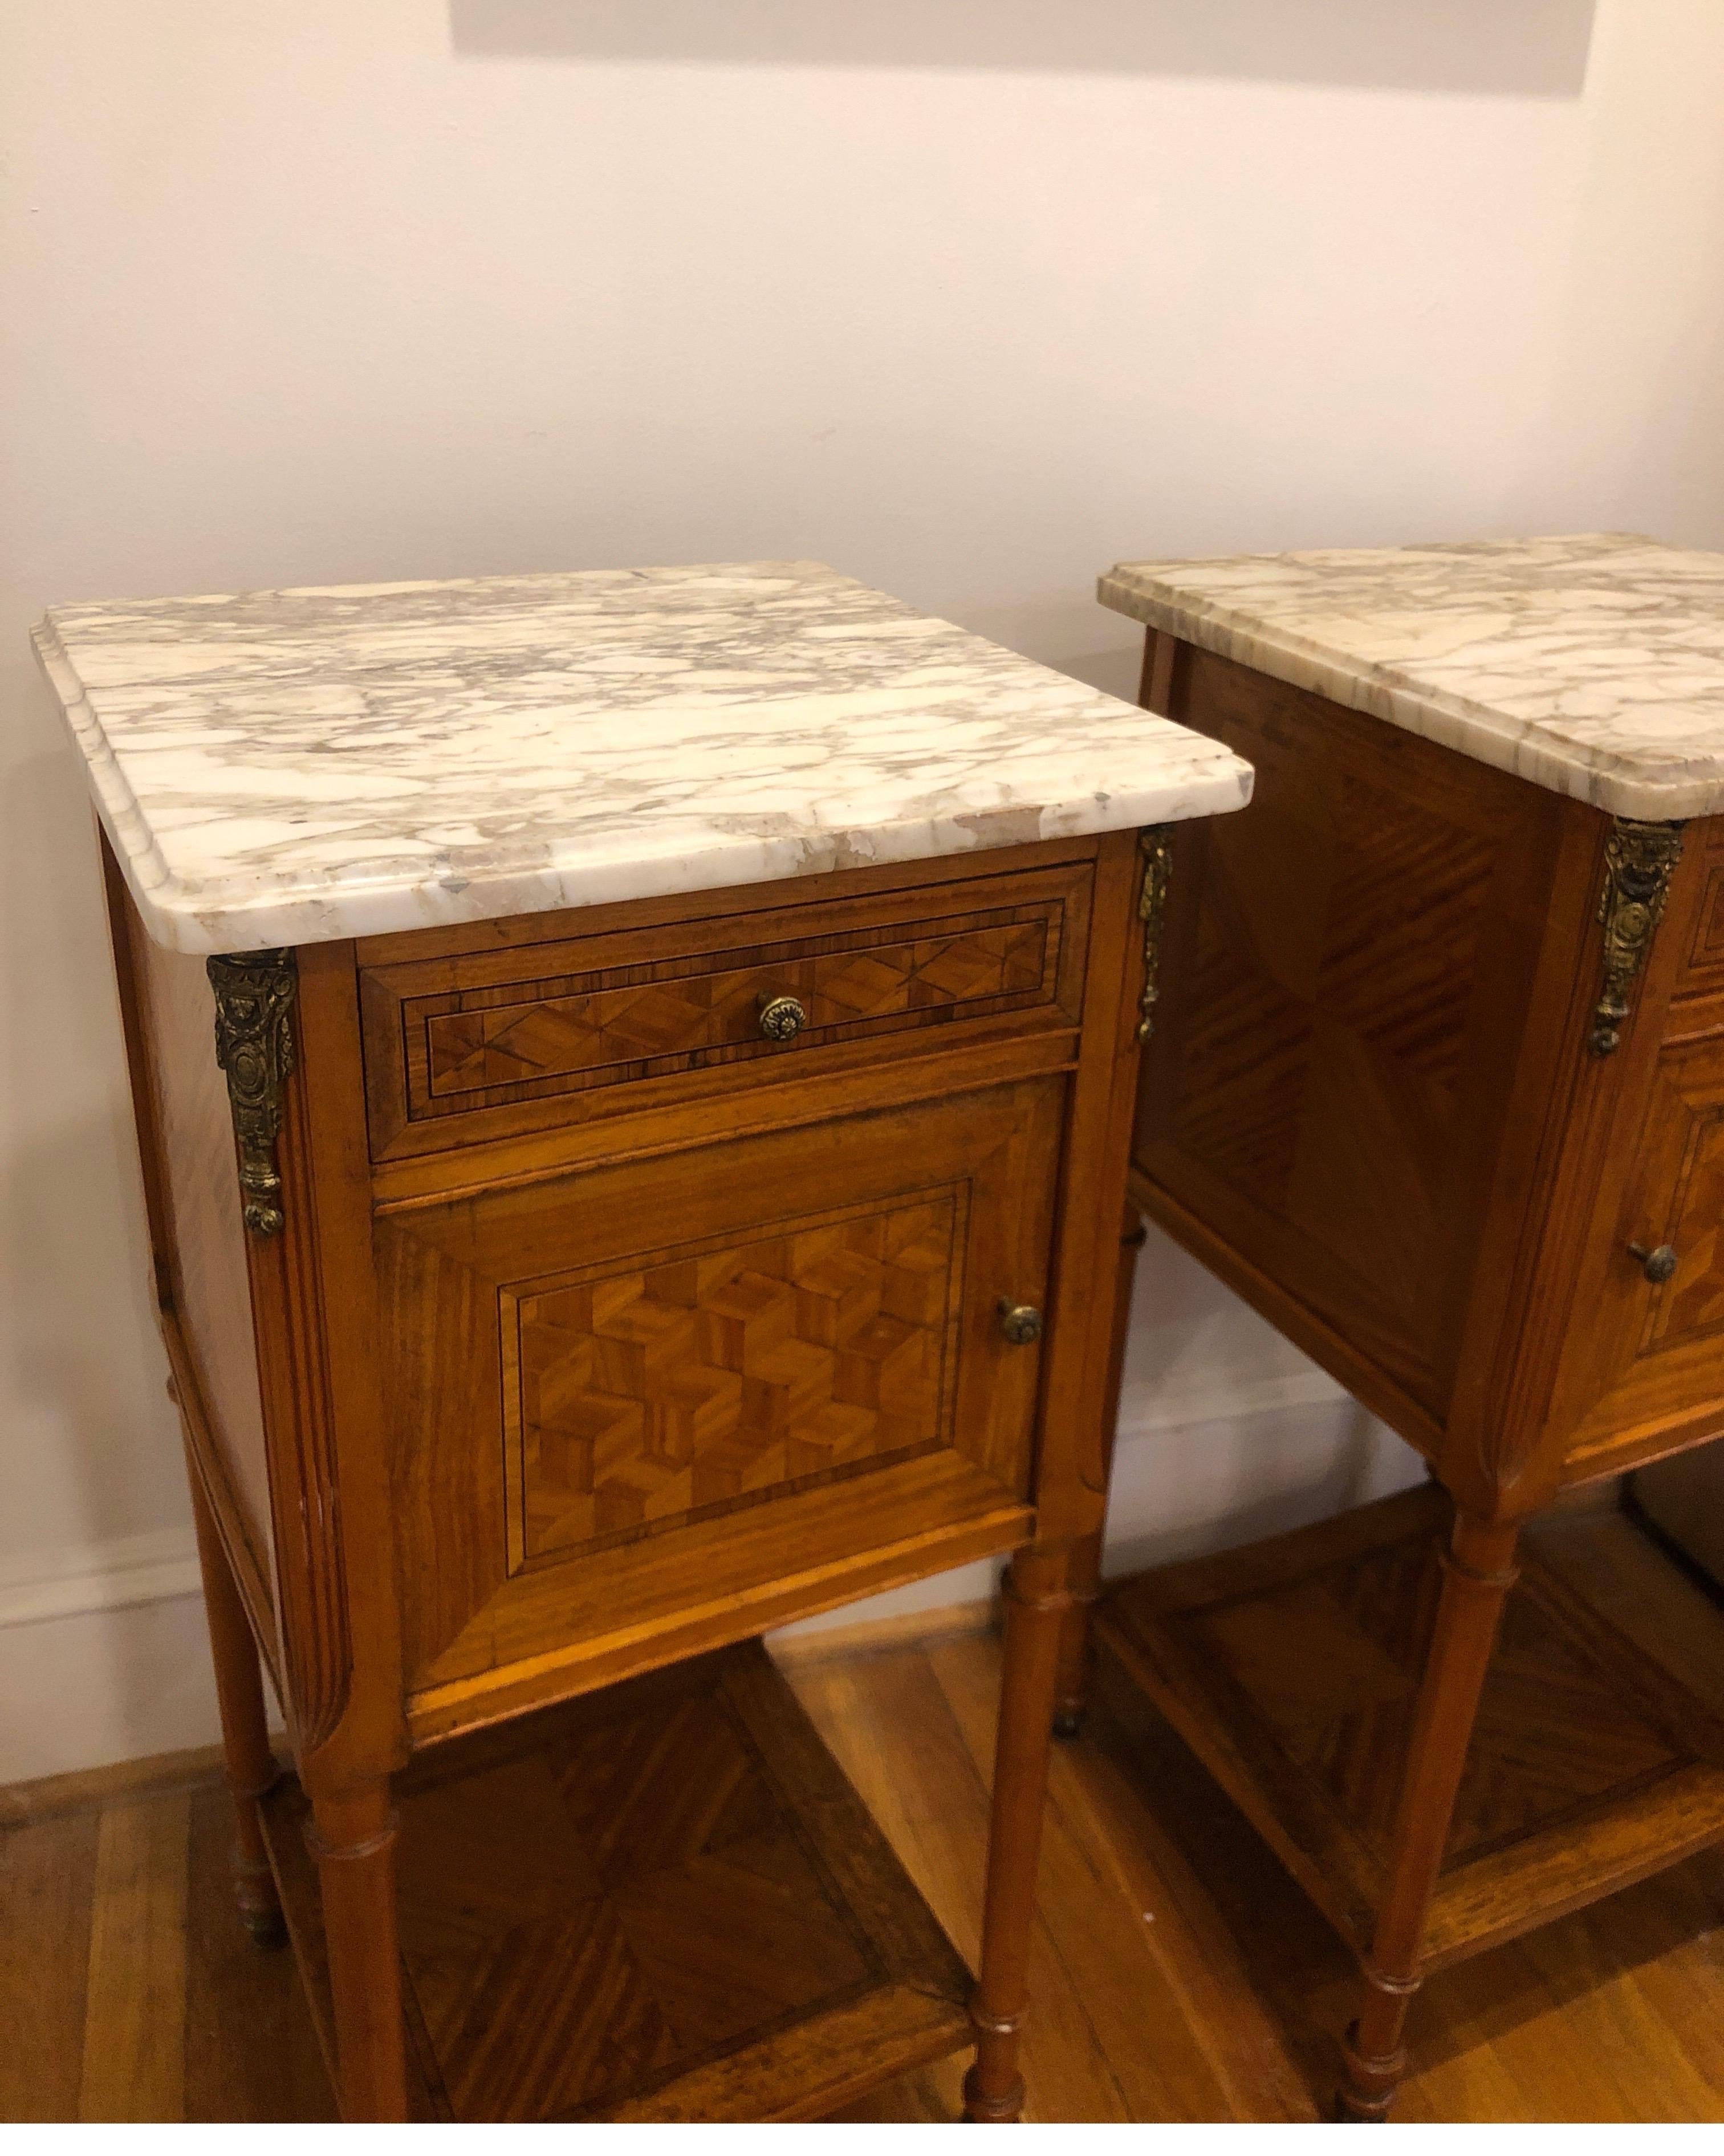 Pair of elegant French Marquetry side tables with gilt ormolu details. 
Doors open with original porcelain insert (please note, one piece of porcelain has damage).

Drawers and doors open smoothly. Marble tops remove for moving. Show signs of